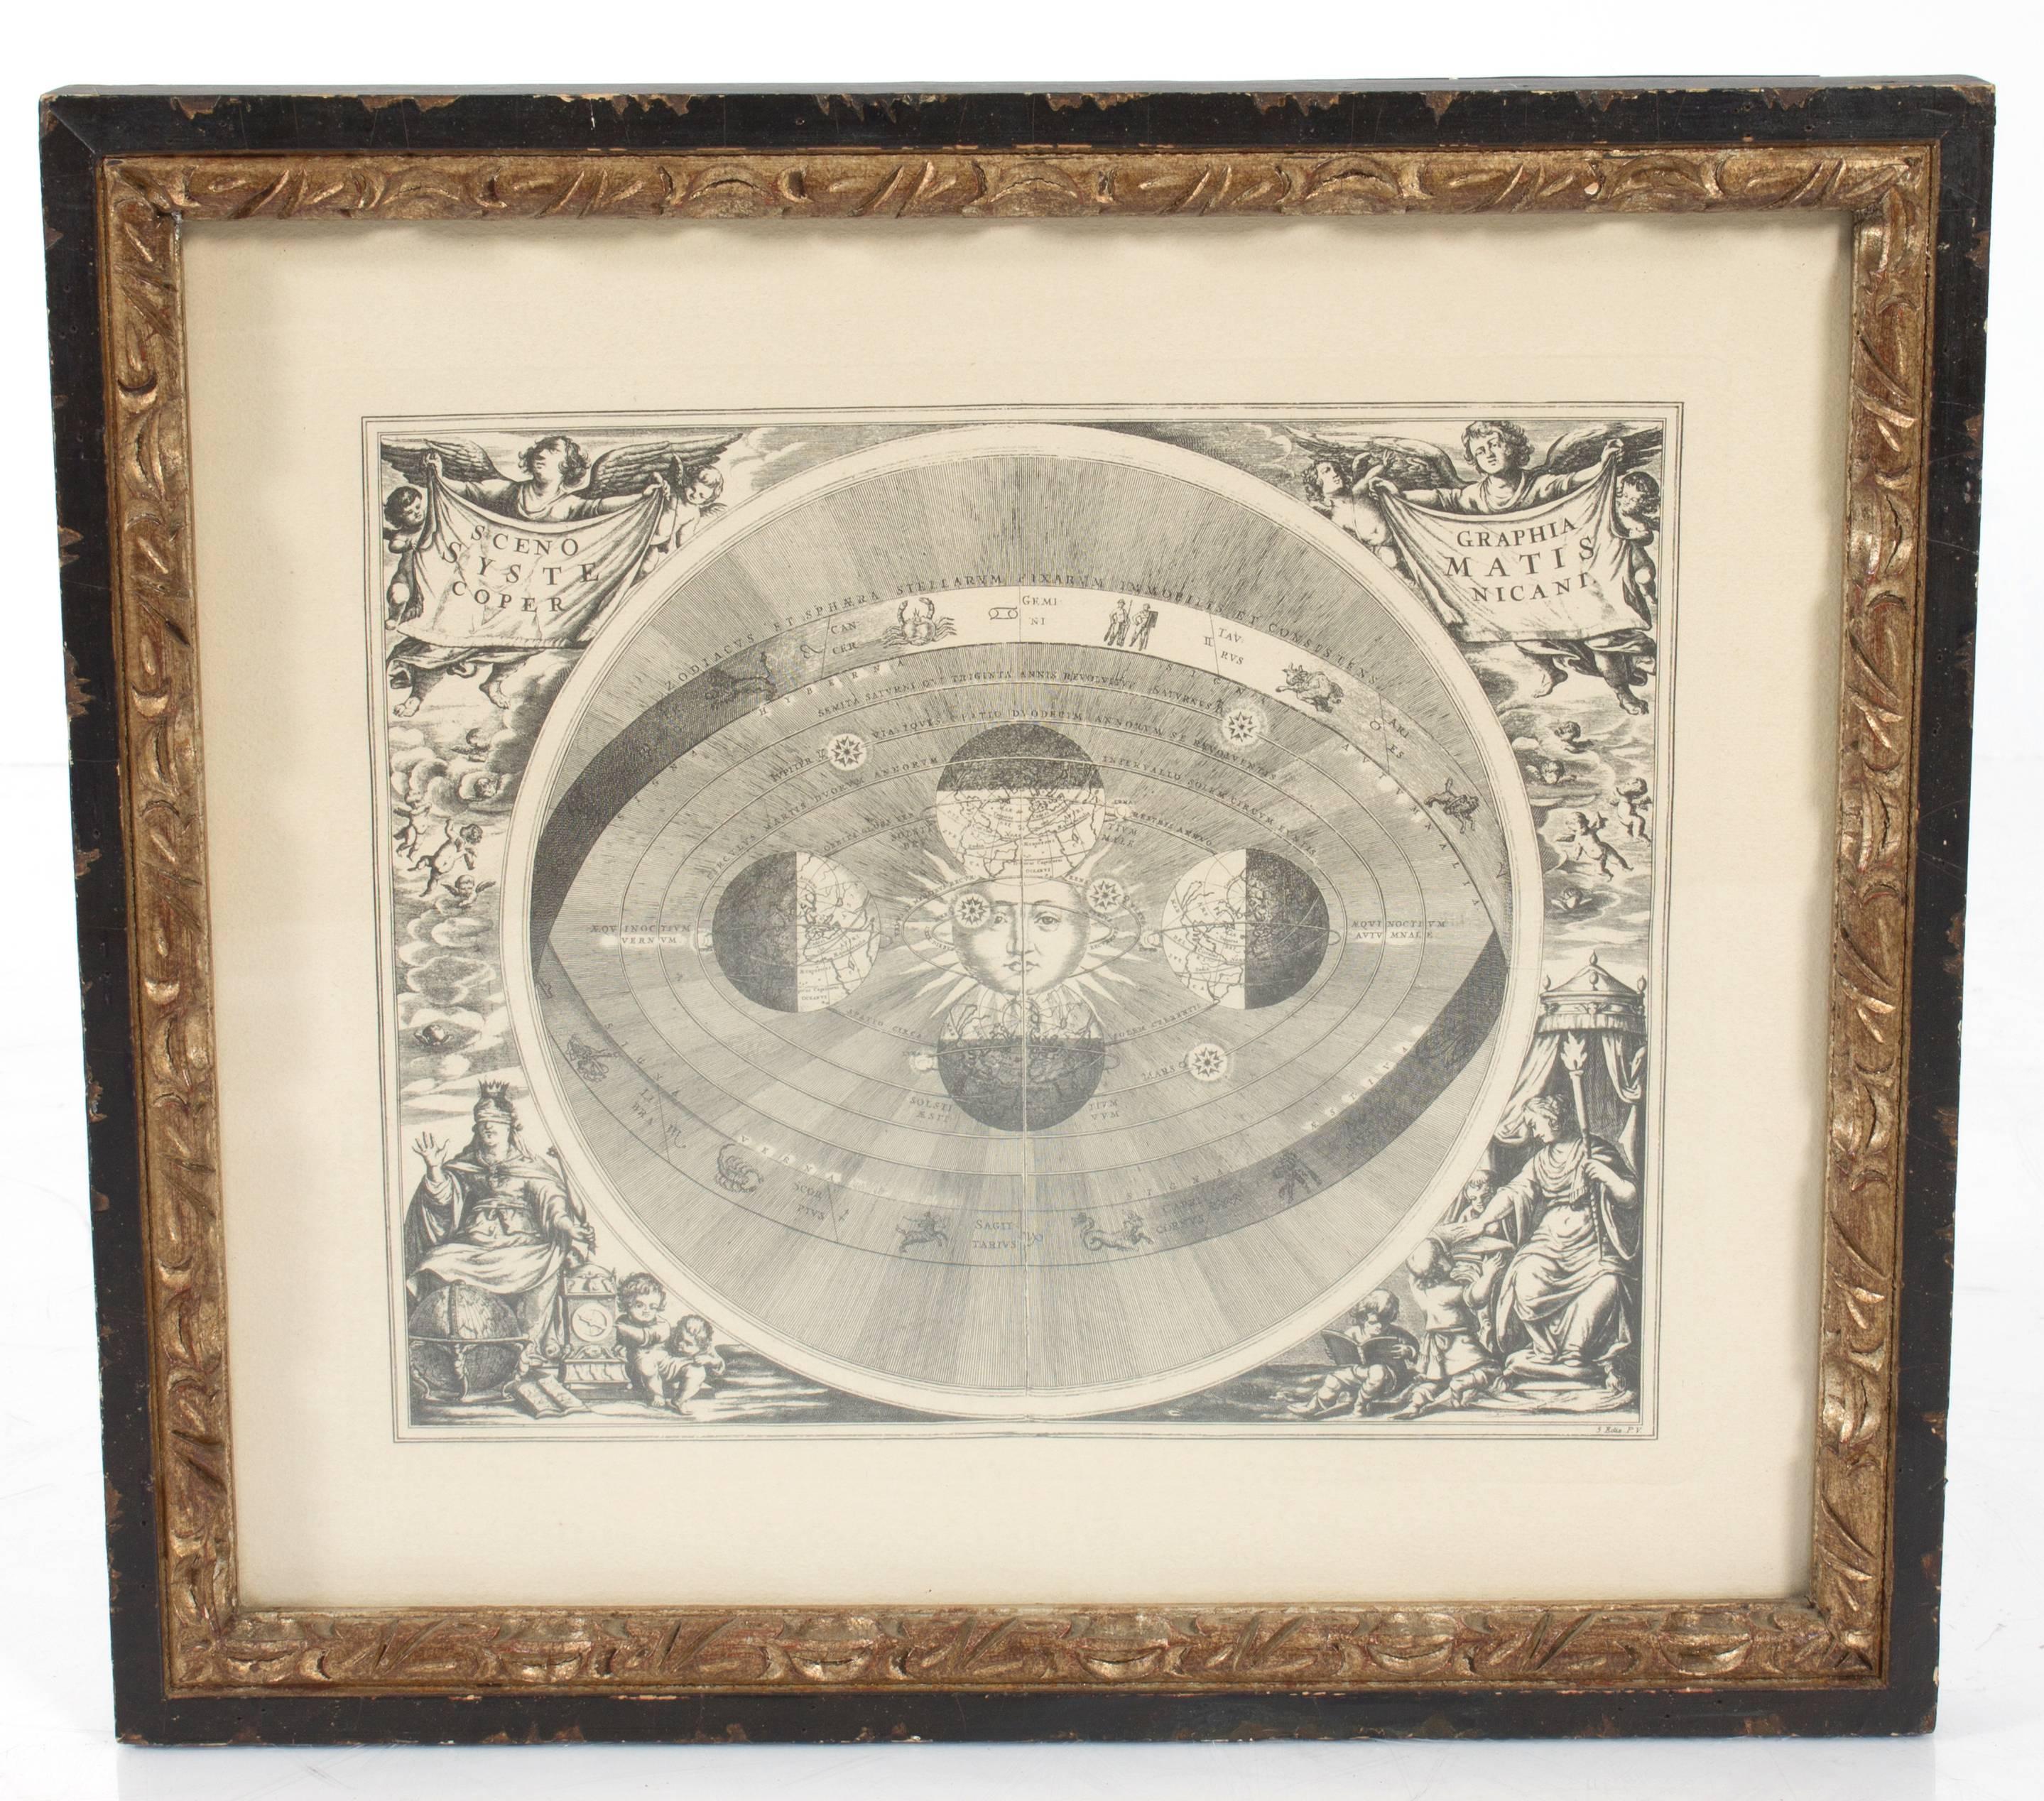 Pair of framed 1950s edition prints of astrological charts by Andreas Cellarius from 